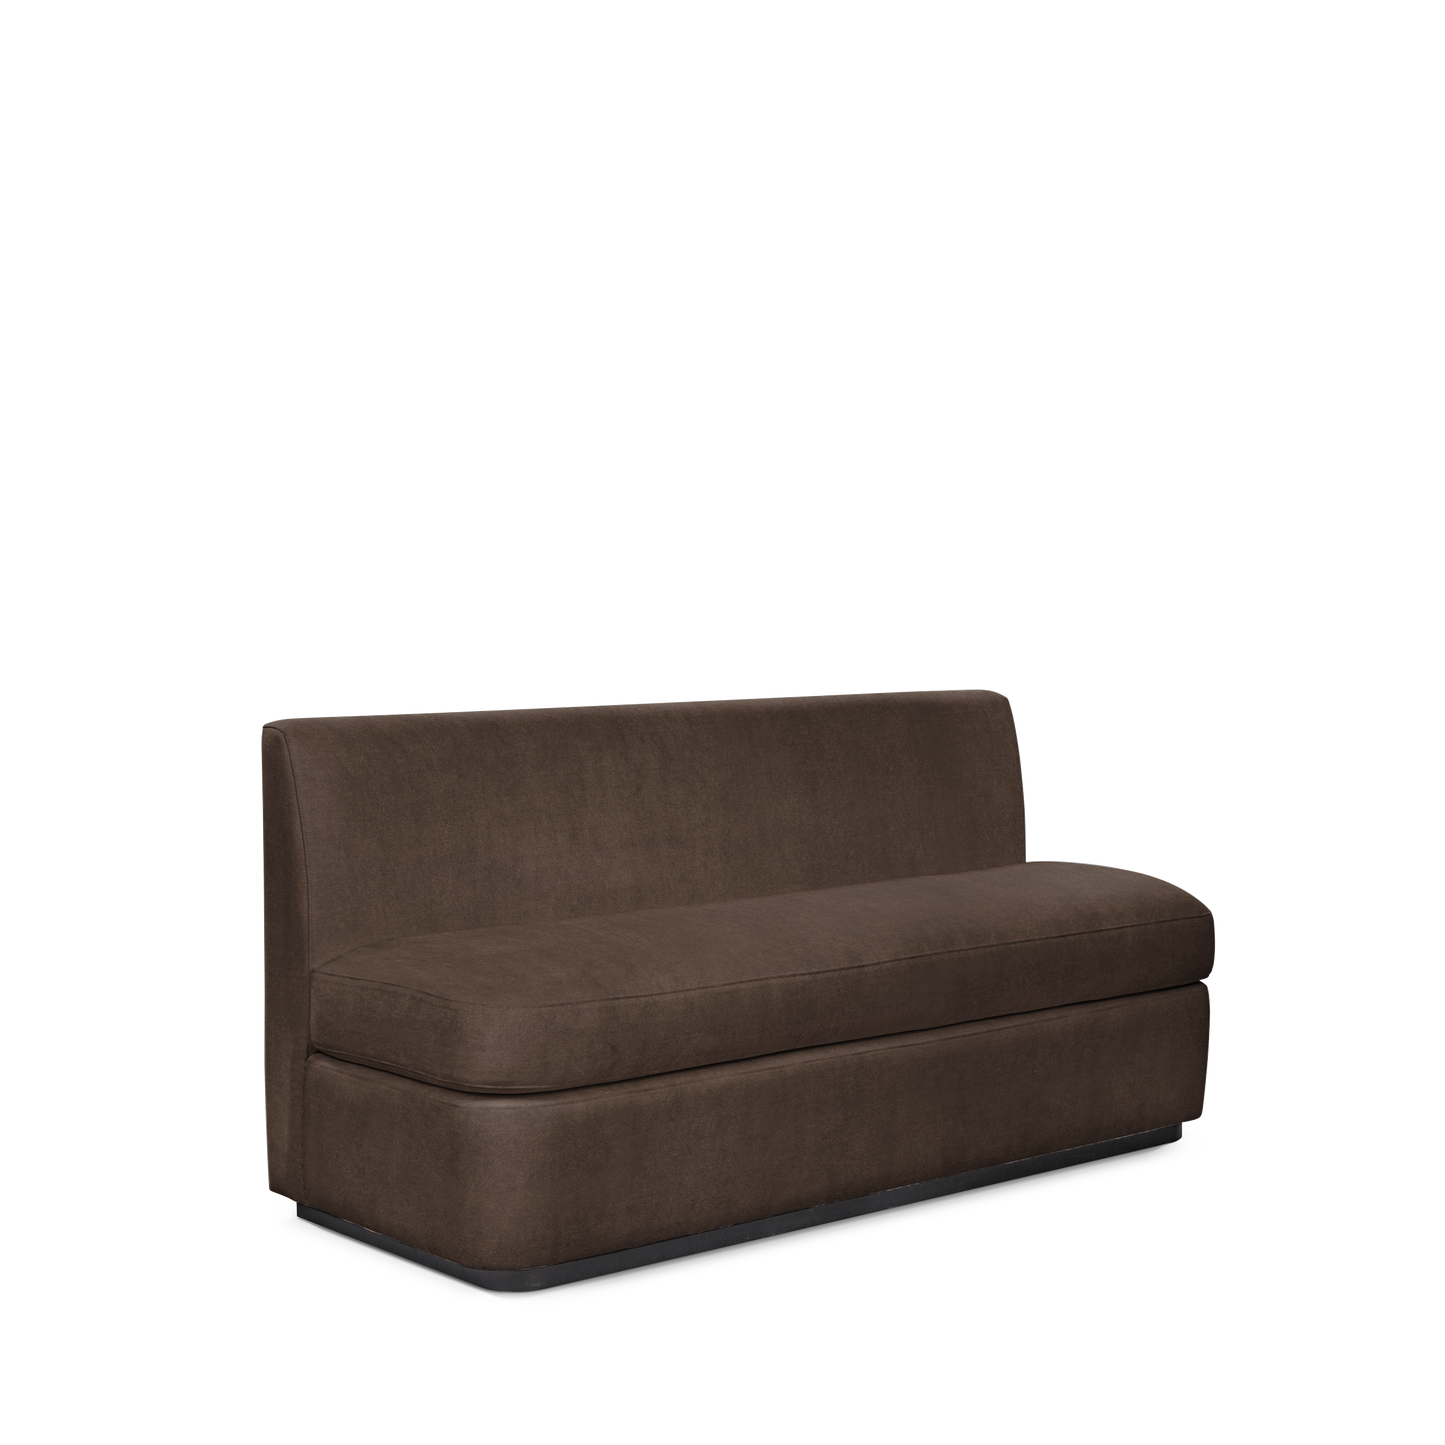  CALMA KITCHEN 3-seater sofa with suede brown textile